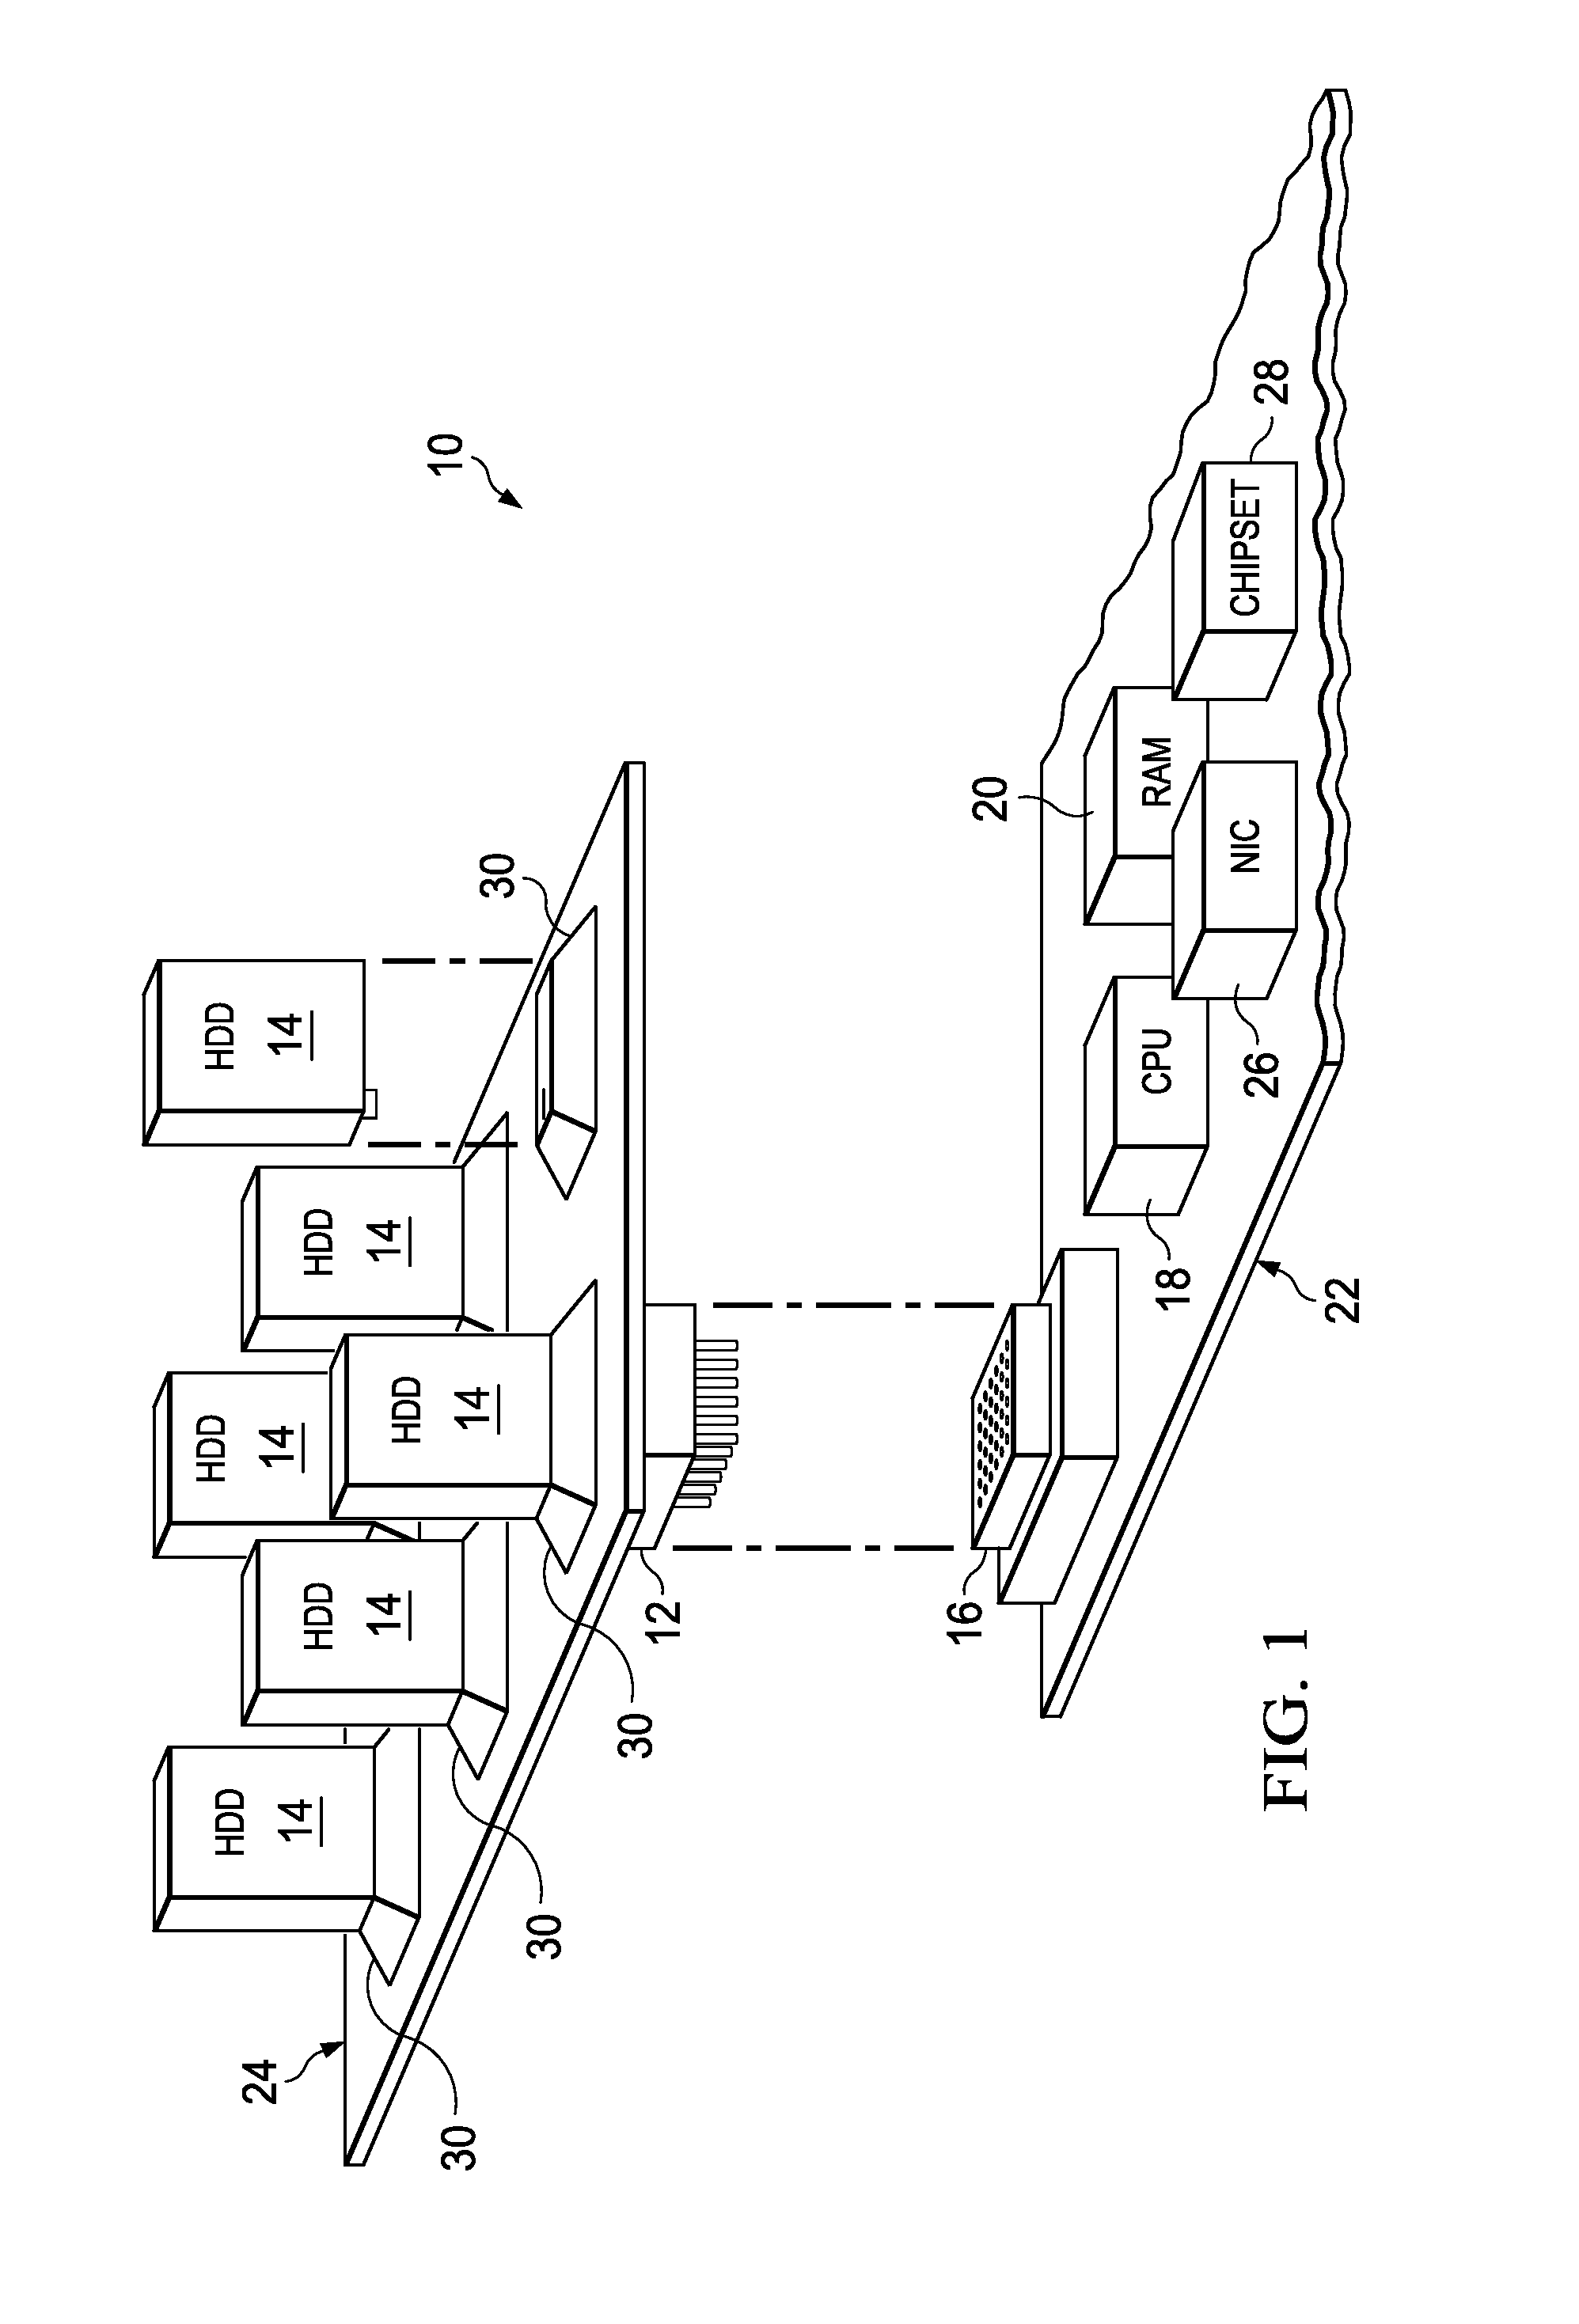 Blind Via Printed Circuit Board Fabrication Supporting Press Fit Connectors